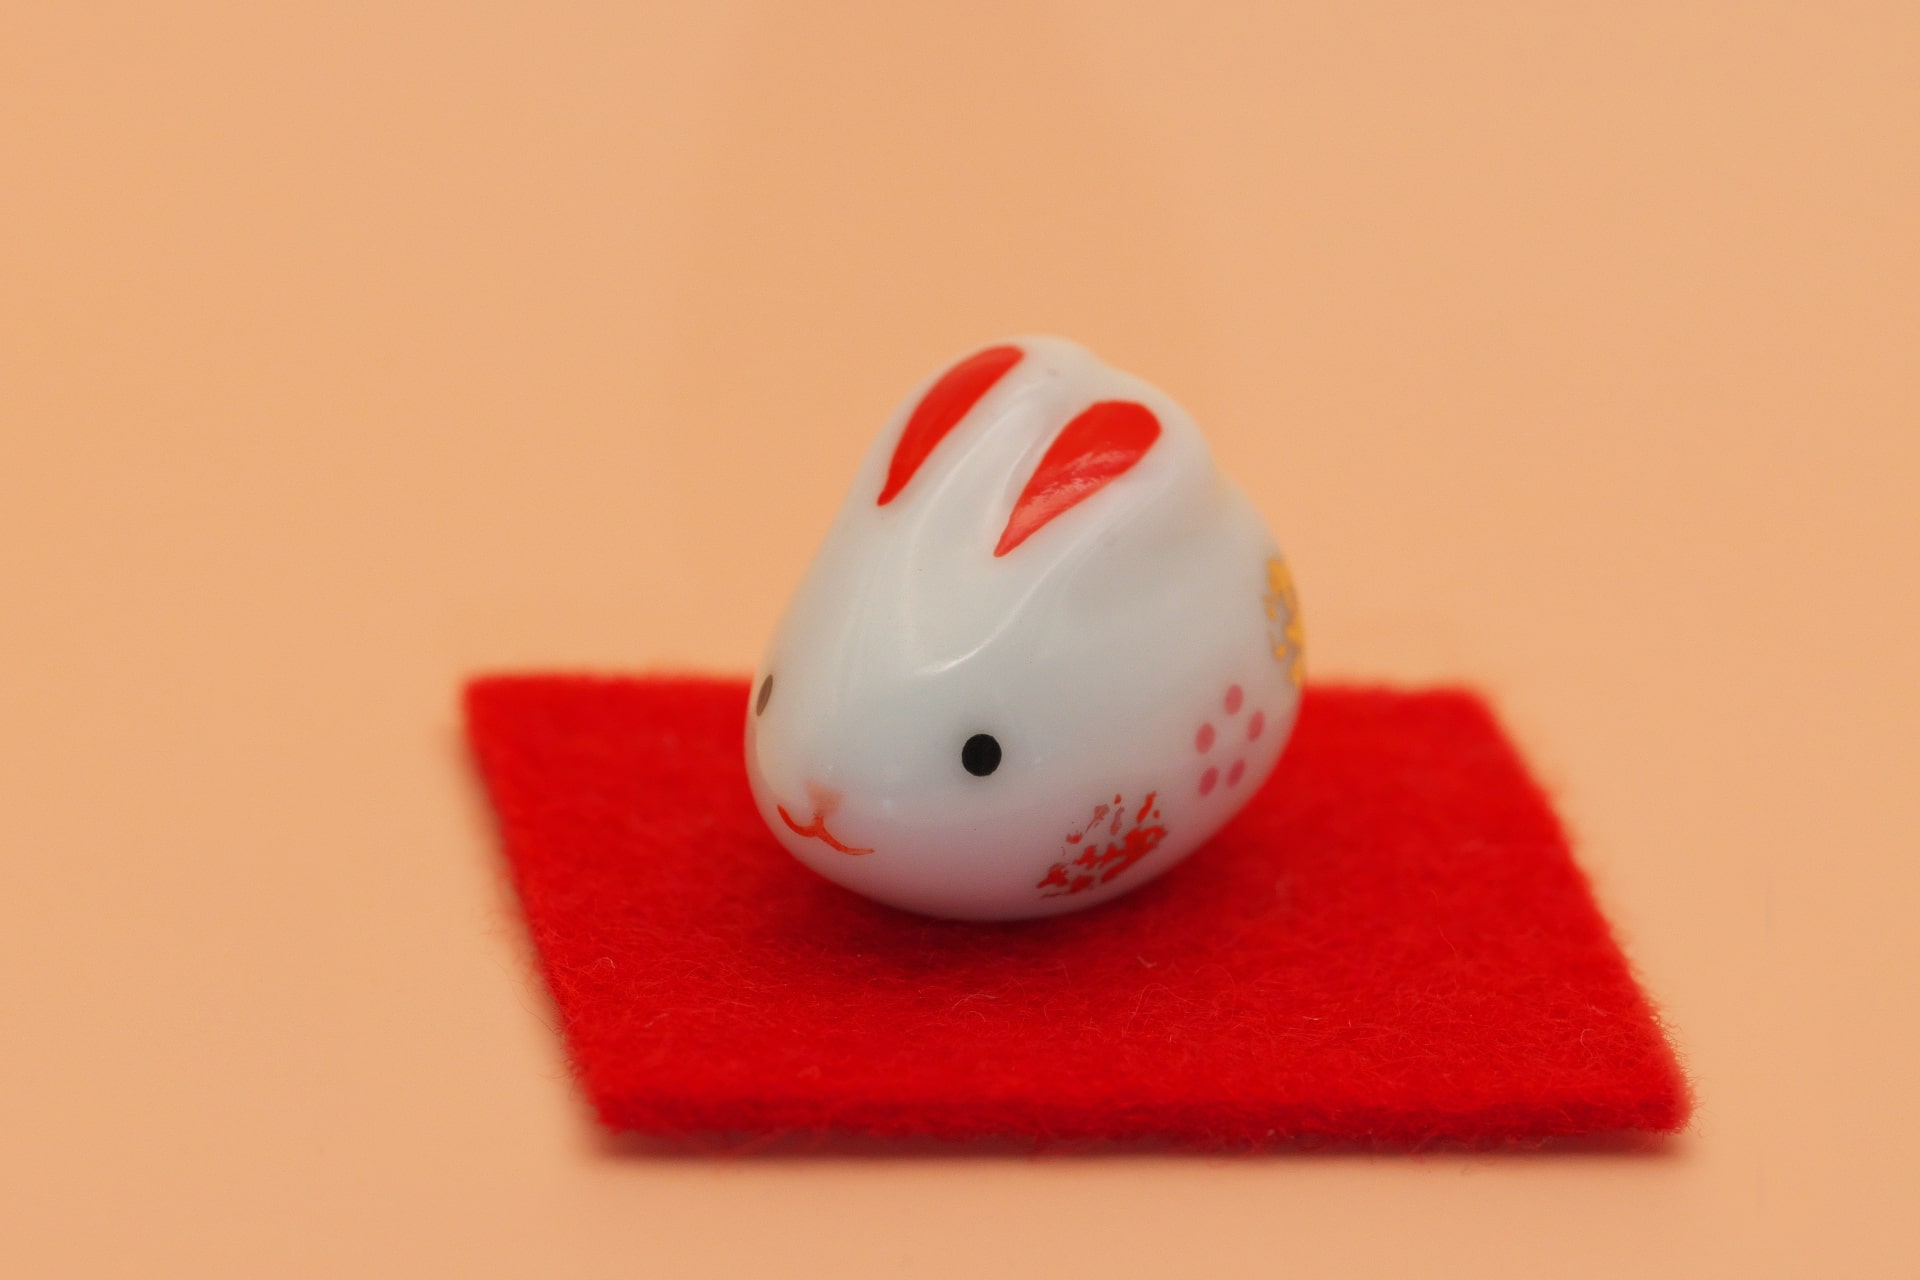 Small figurine depicting the rabbit from Chinese Zodiac